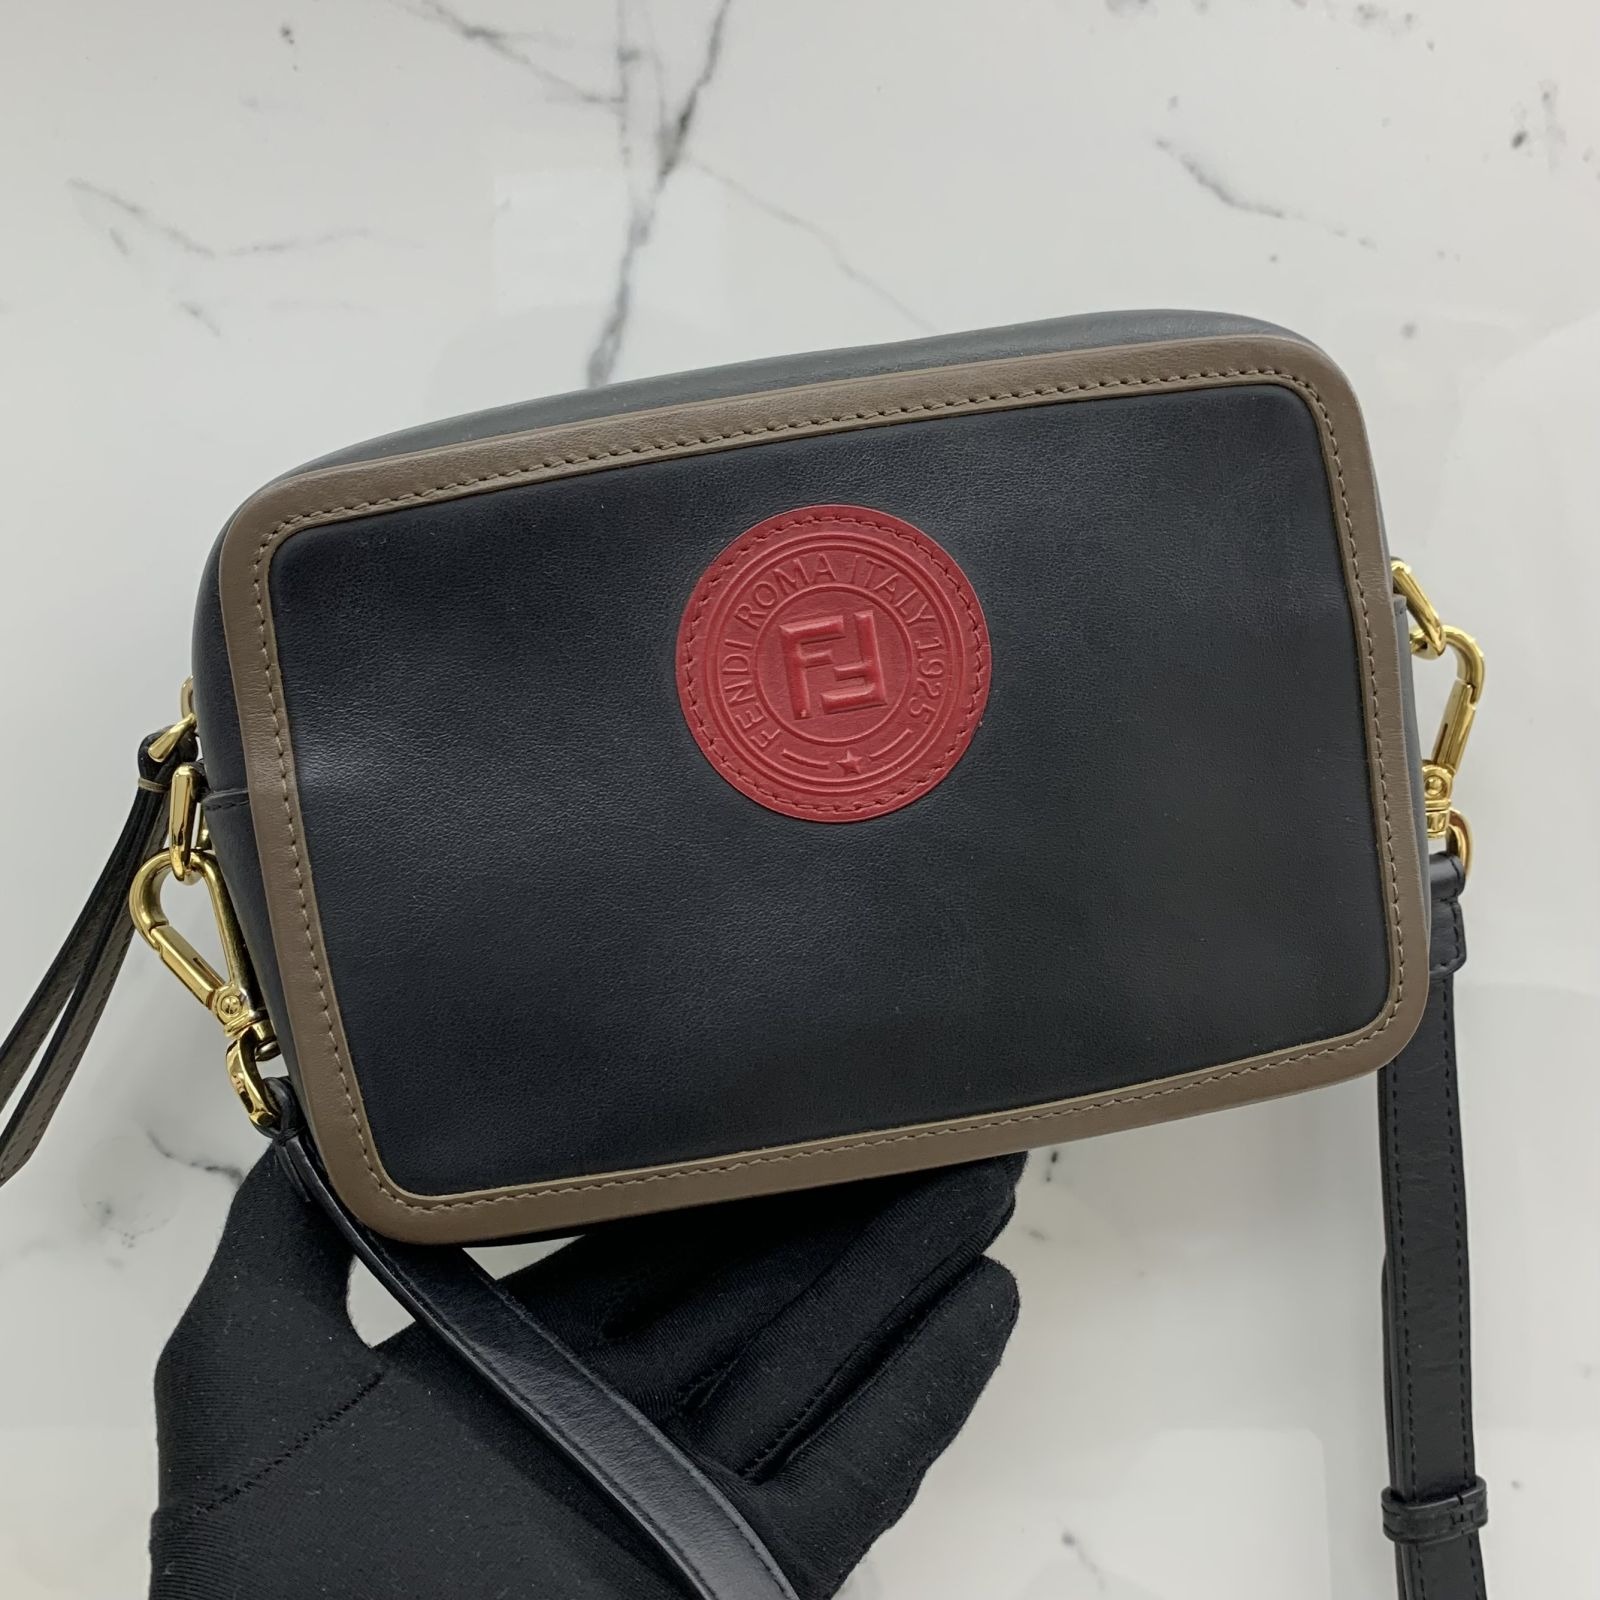 FENDI CAMERA BAG UNBOXING AND REVIEW, MISS GUNNER